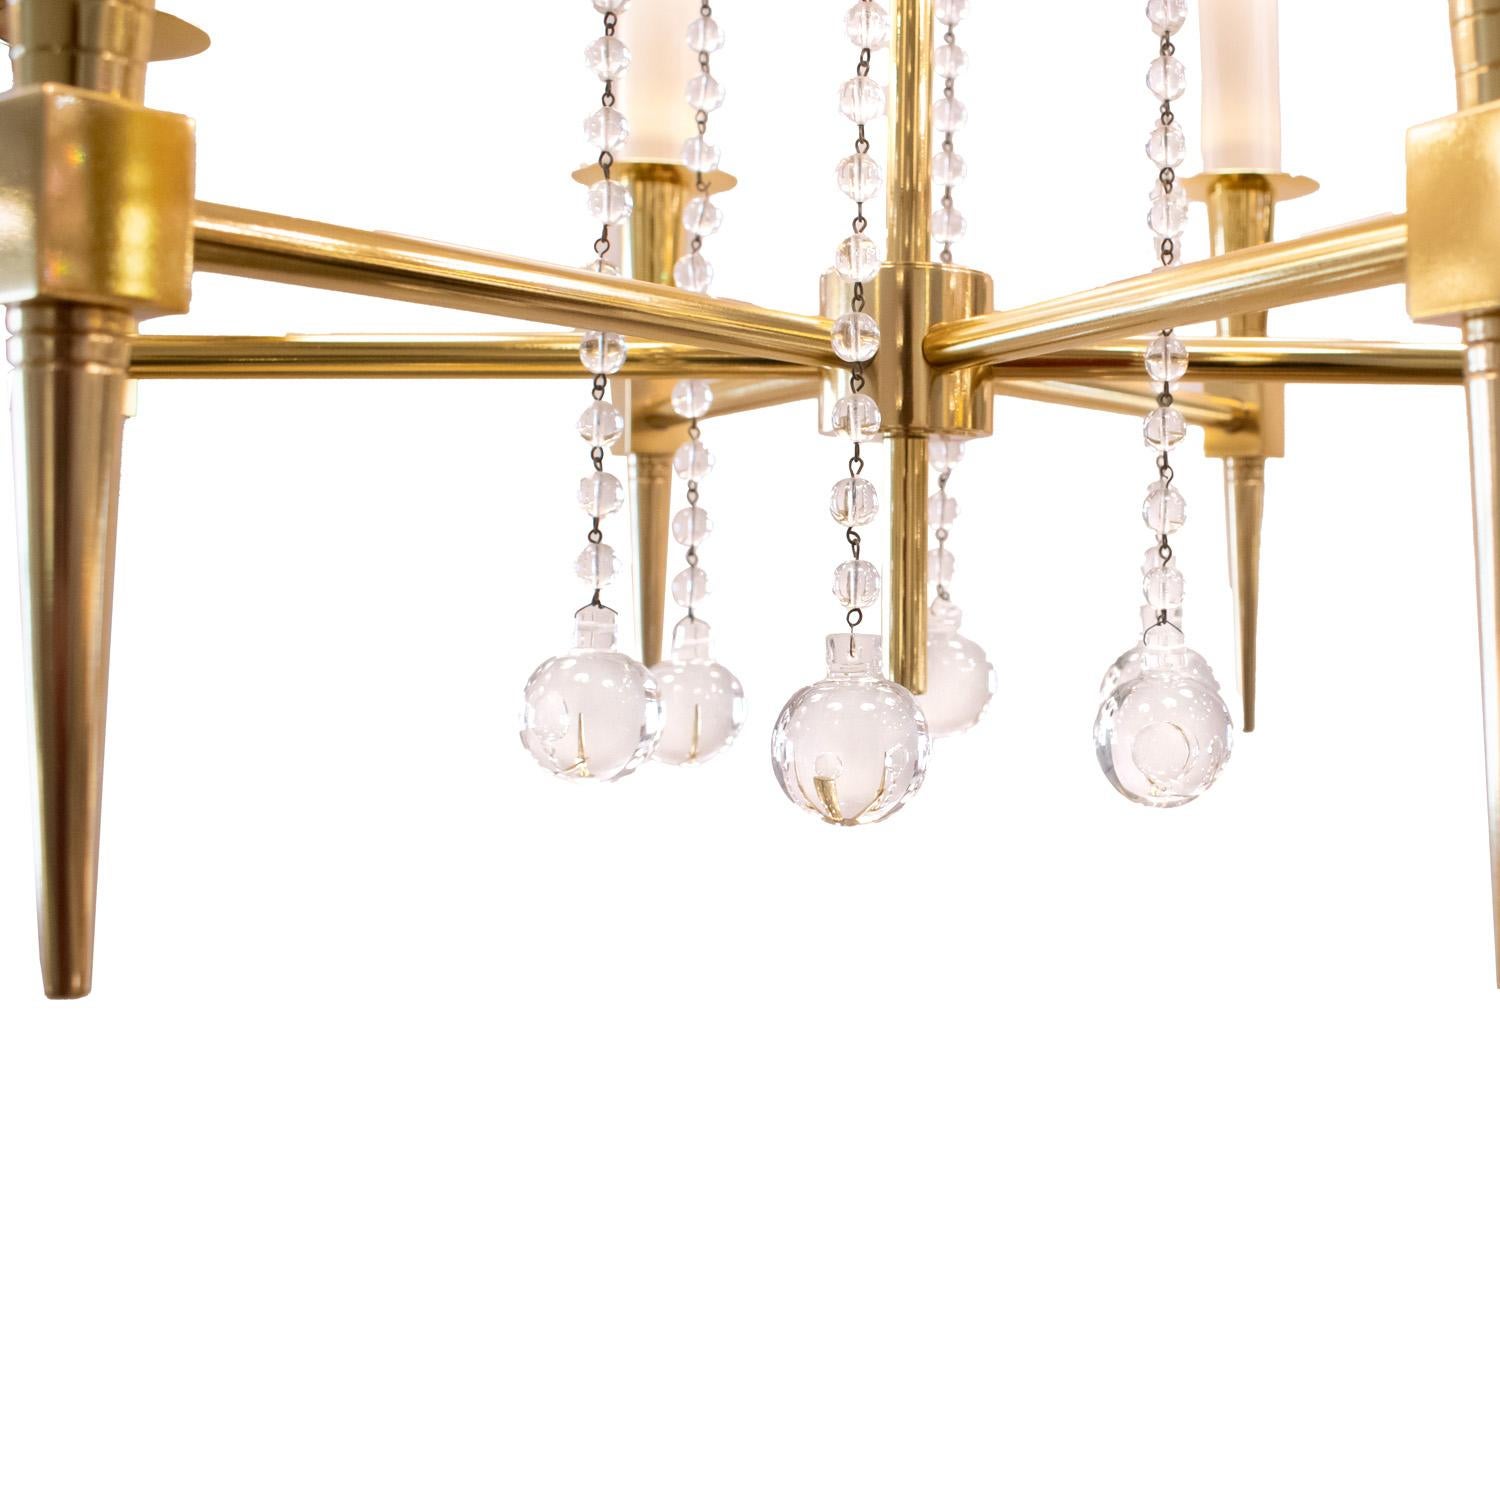 American Tommi Parzinger Elegant 6 Arm Chandelier in Brass with Crystal Beads 1950s For Sale